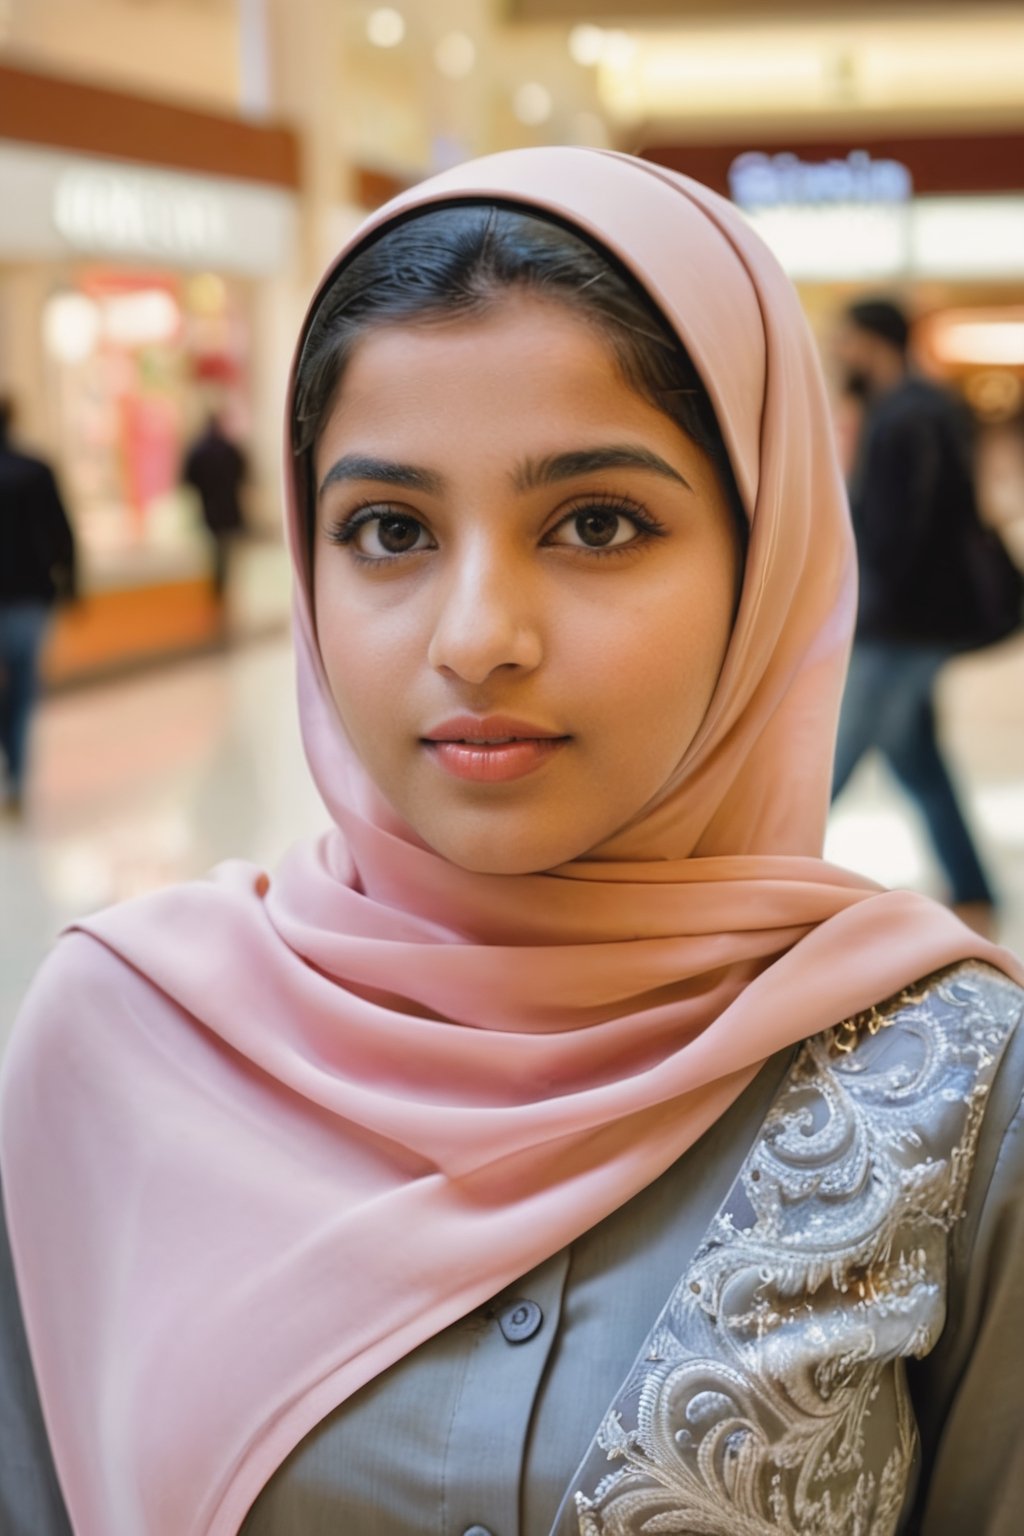  18 years Indian Muslim girl,  realistic image, at mall